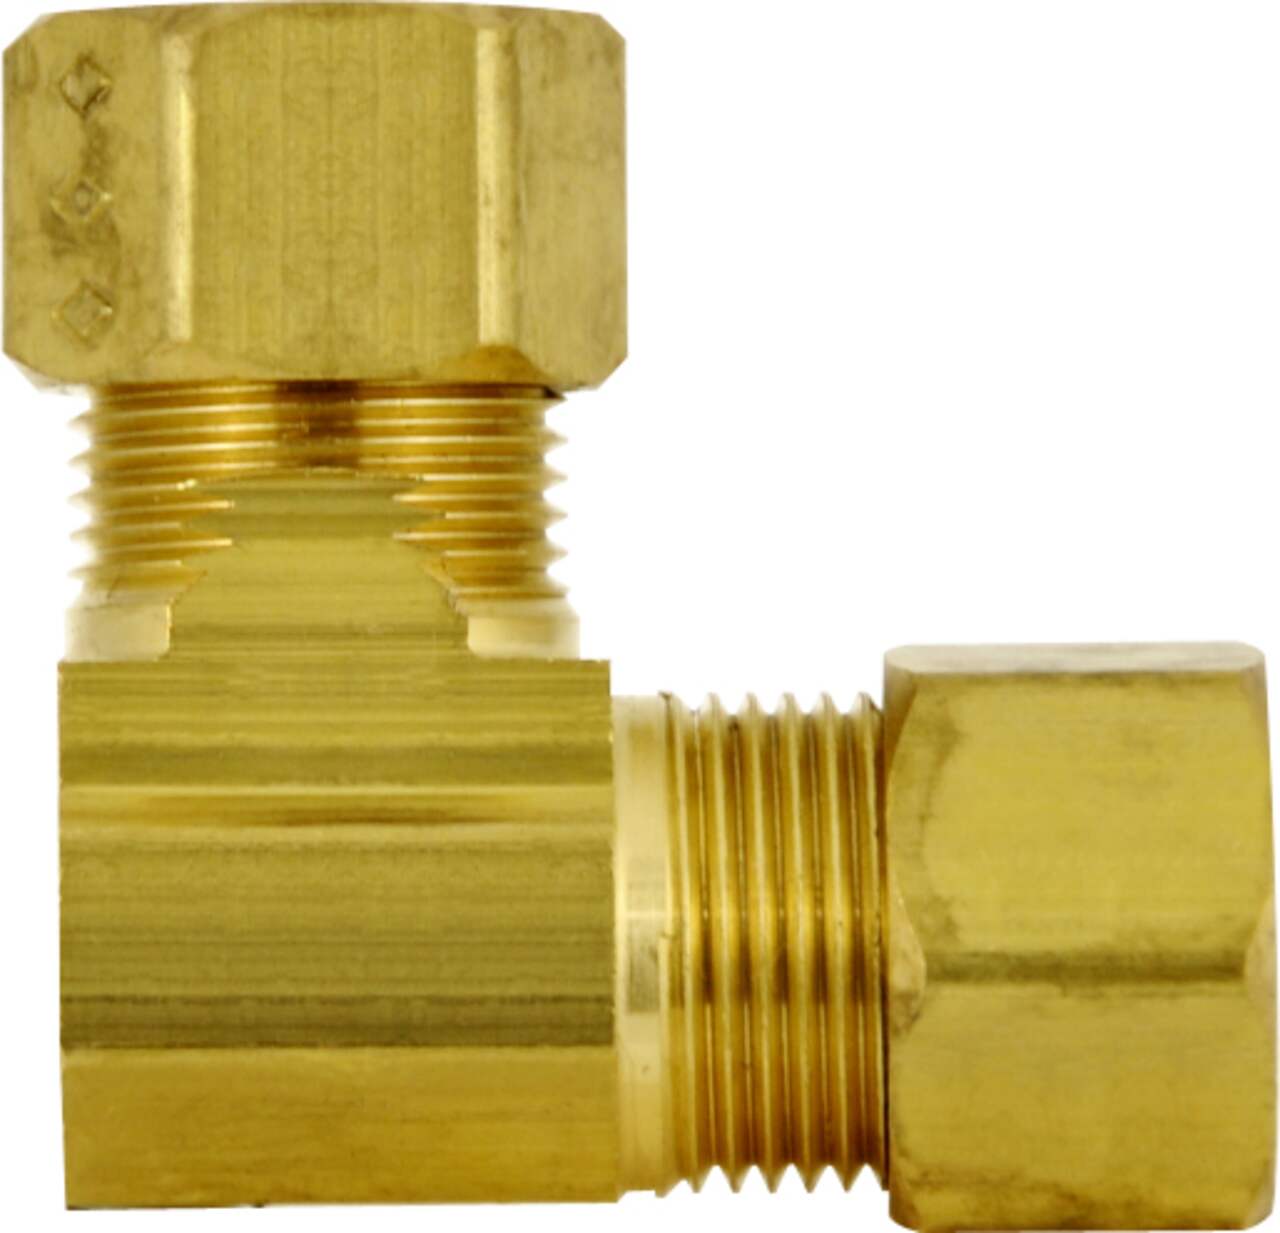 PlumbShop Brass Compression Elbow Fitting, 1/2-in MIP x 3/8-in OD, 1-pk